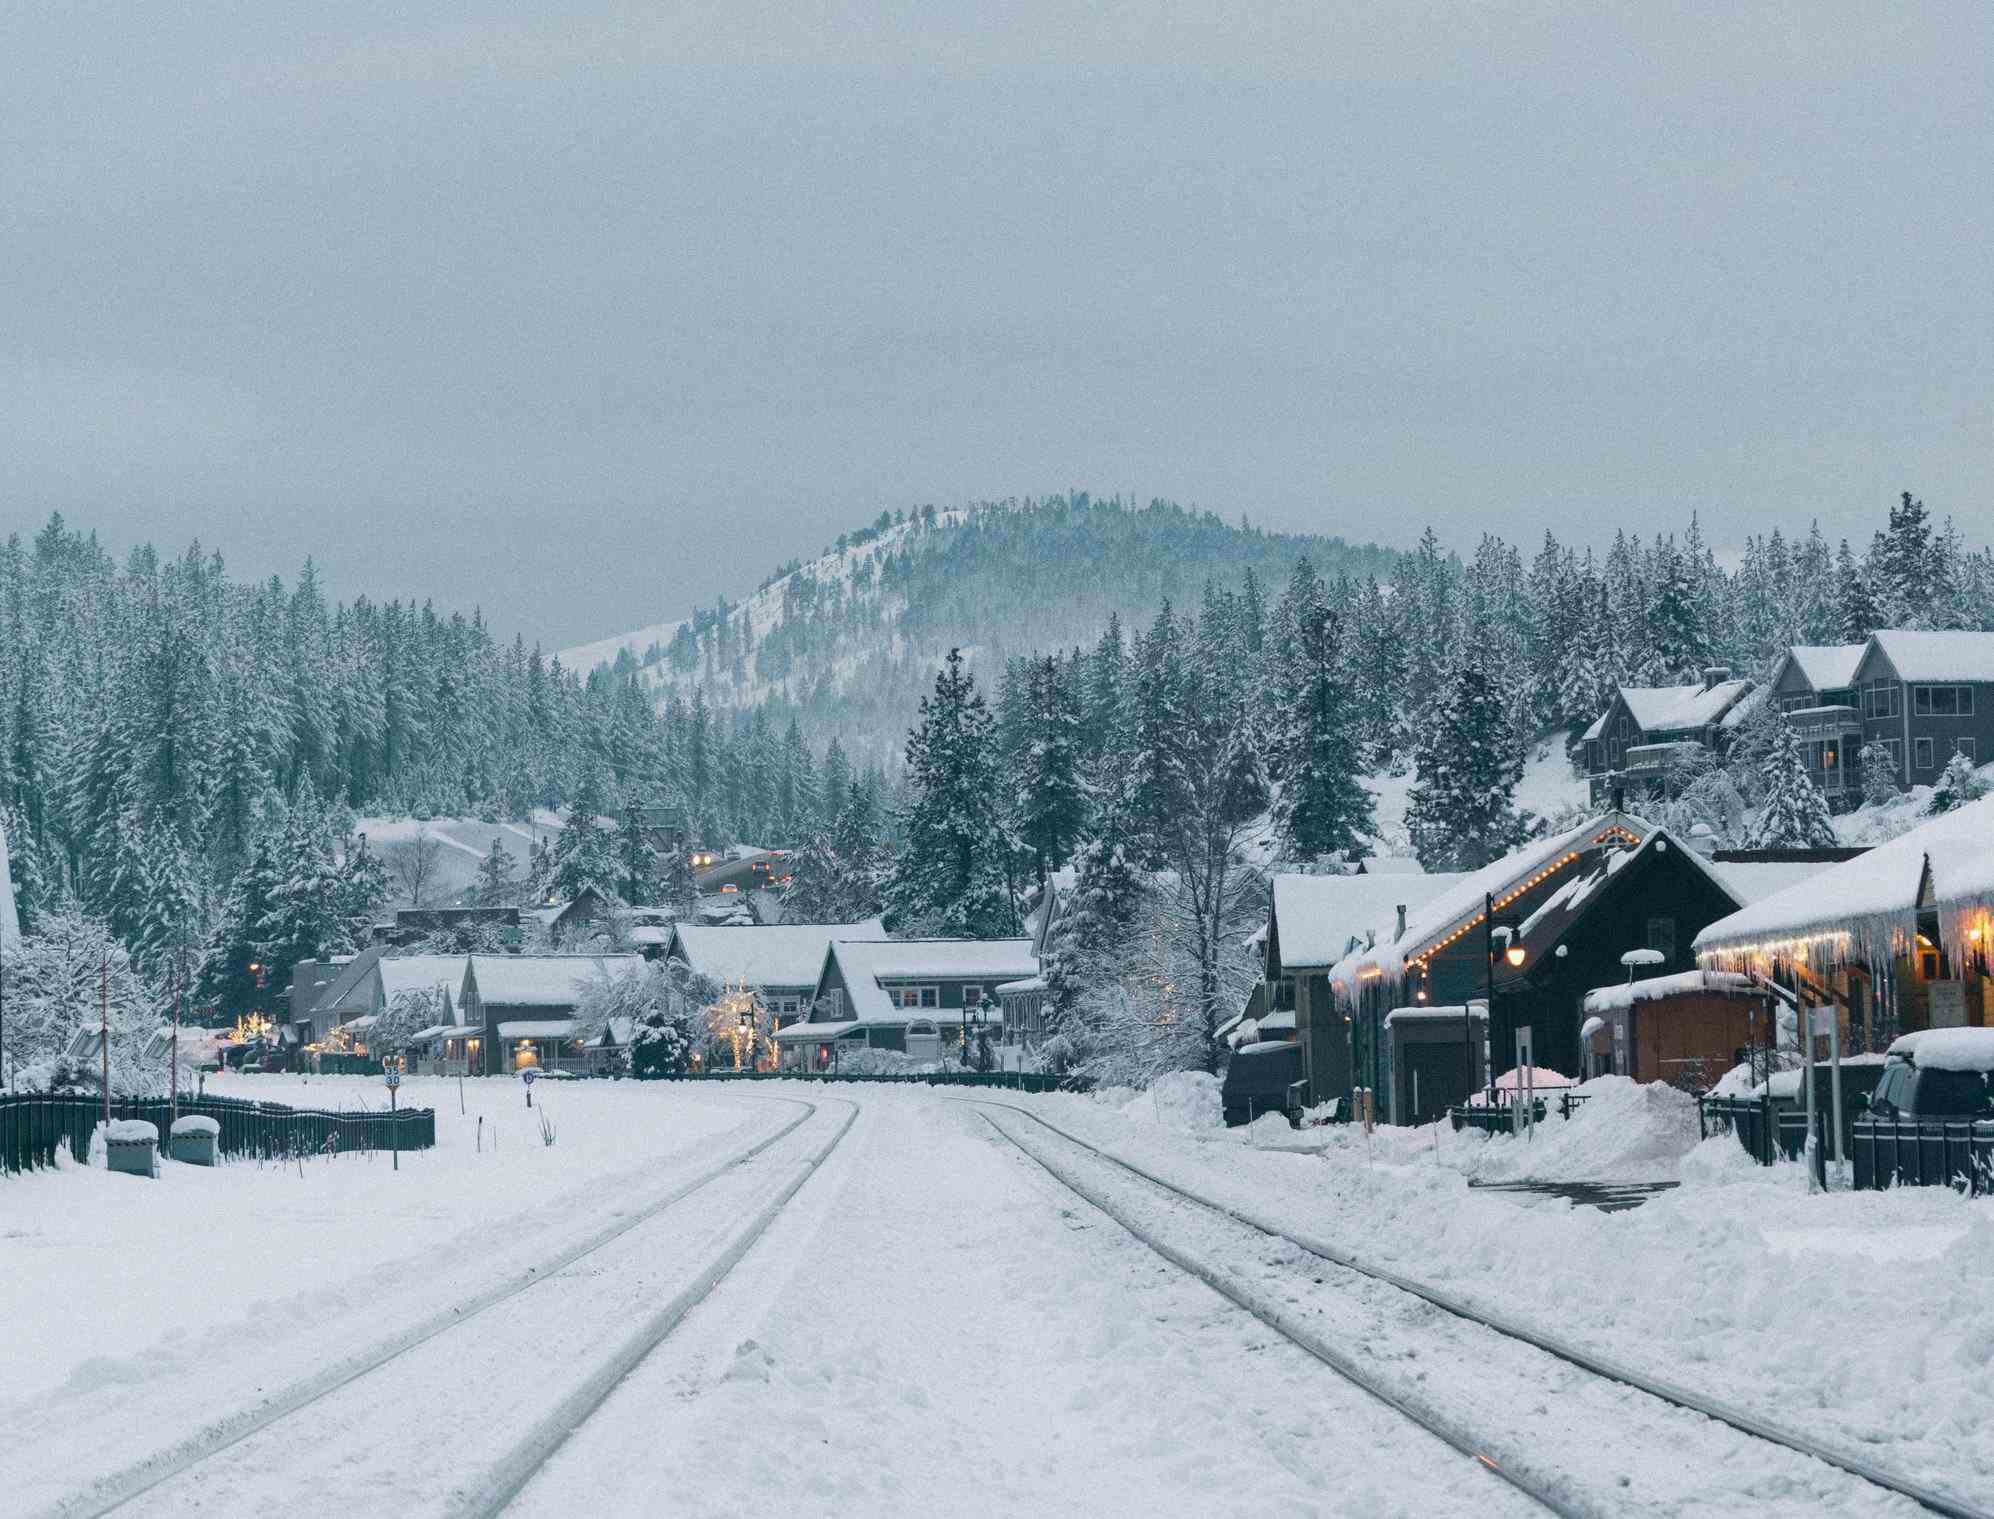 Town of Truckee, CA after a snow storm